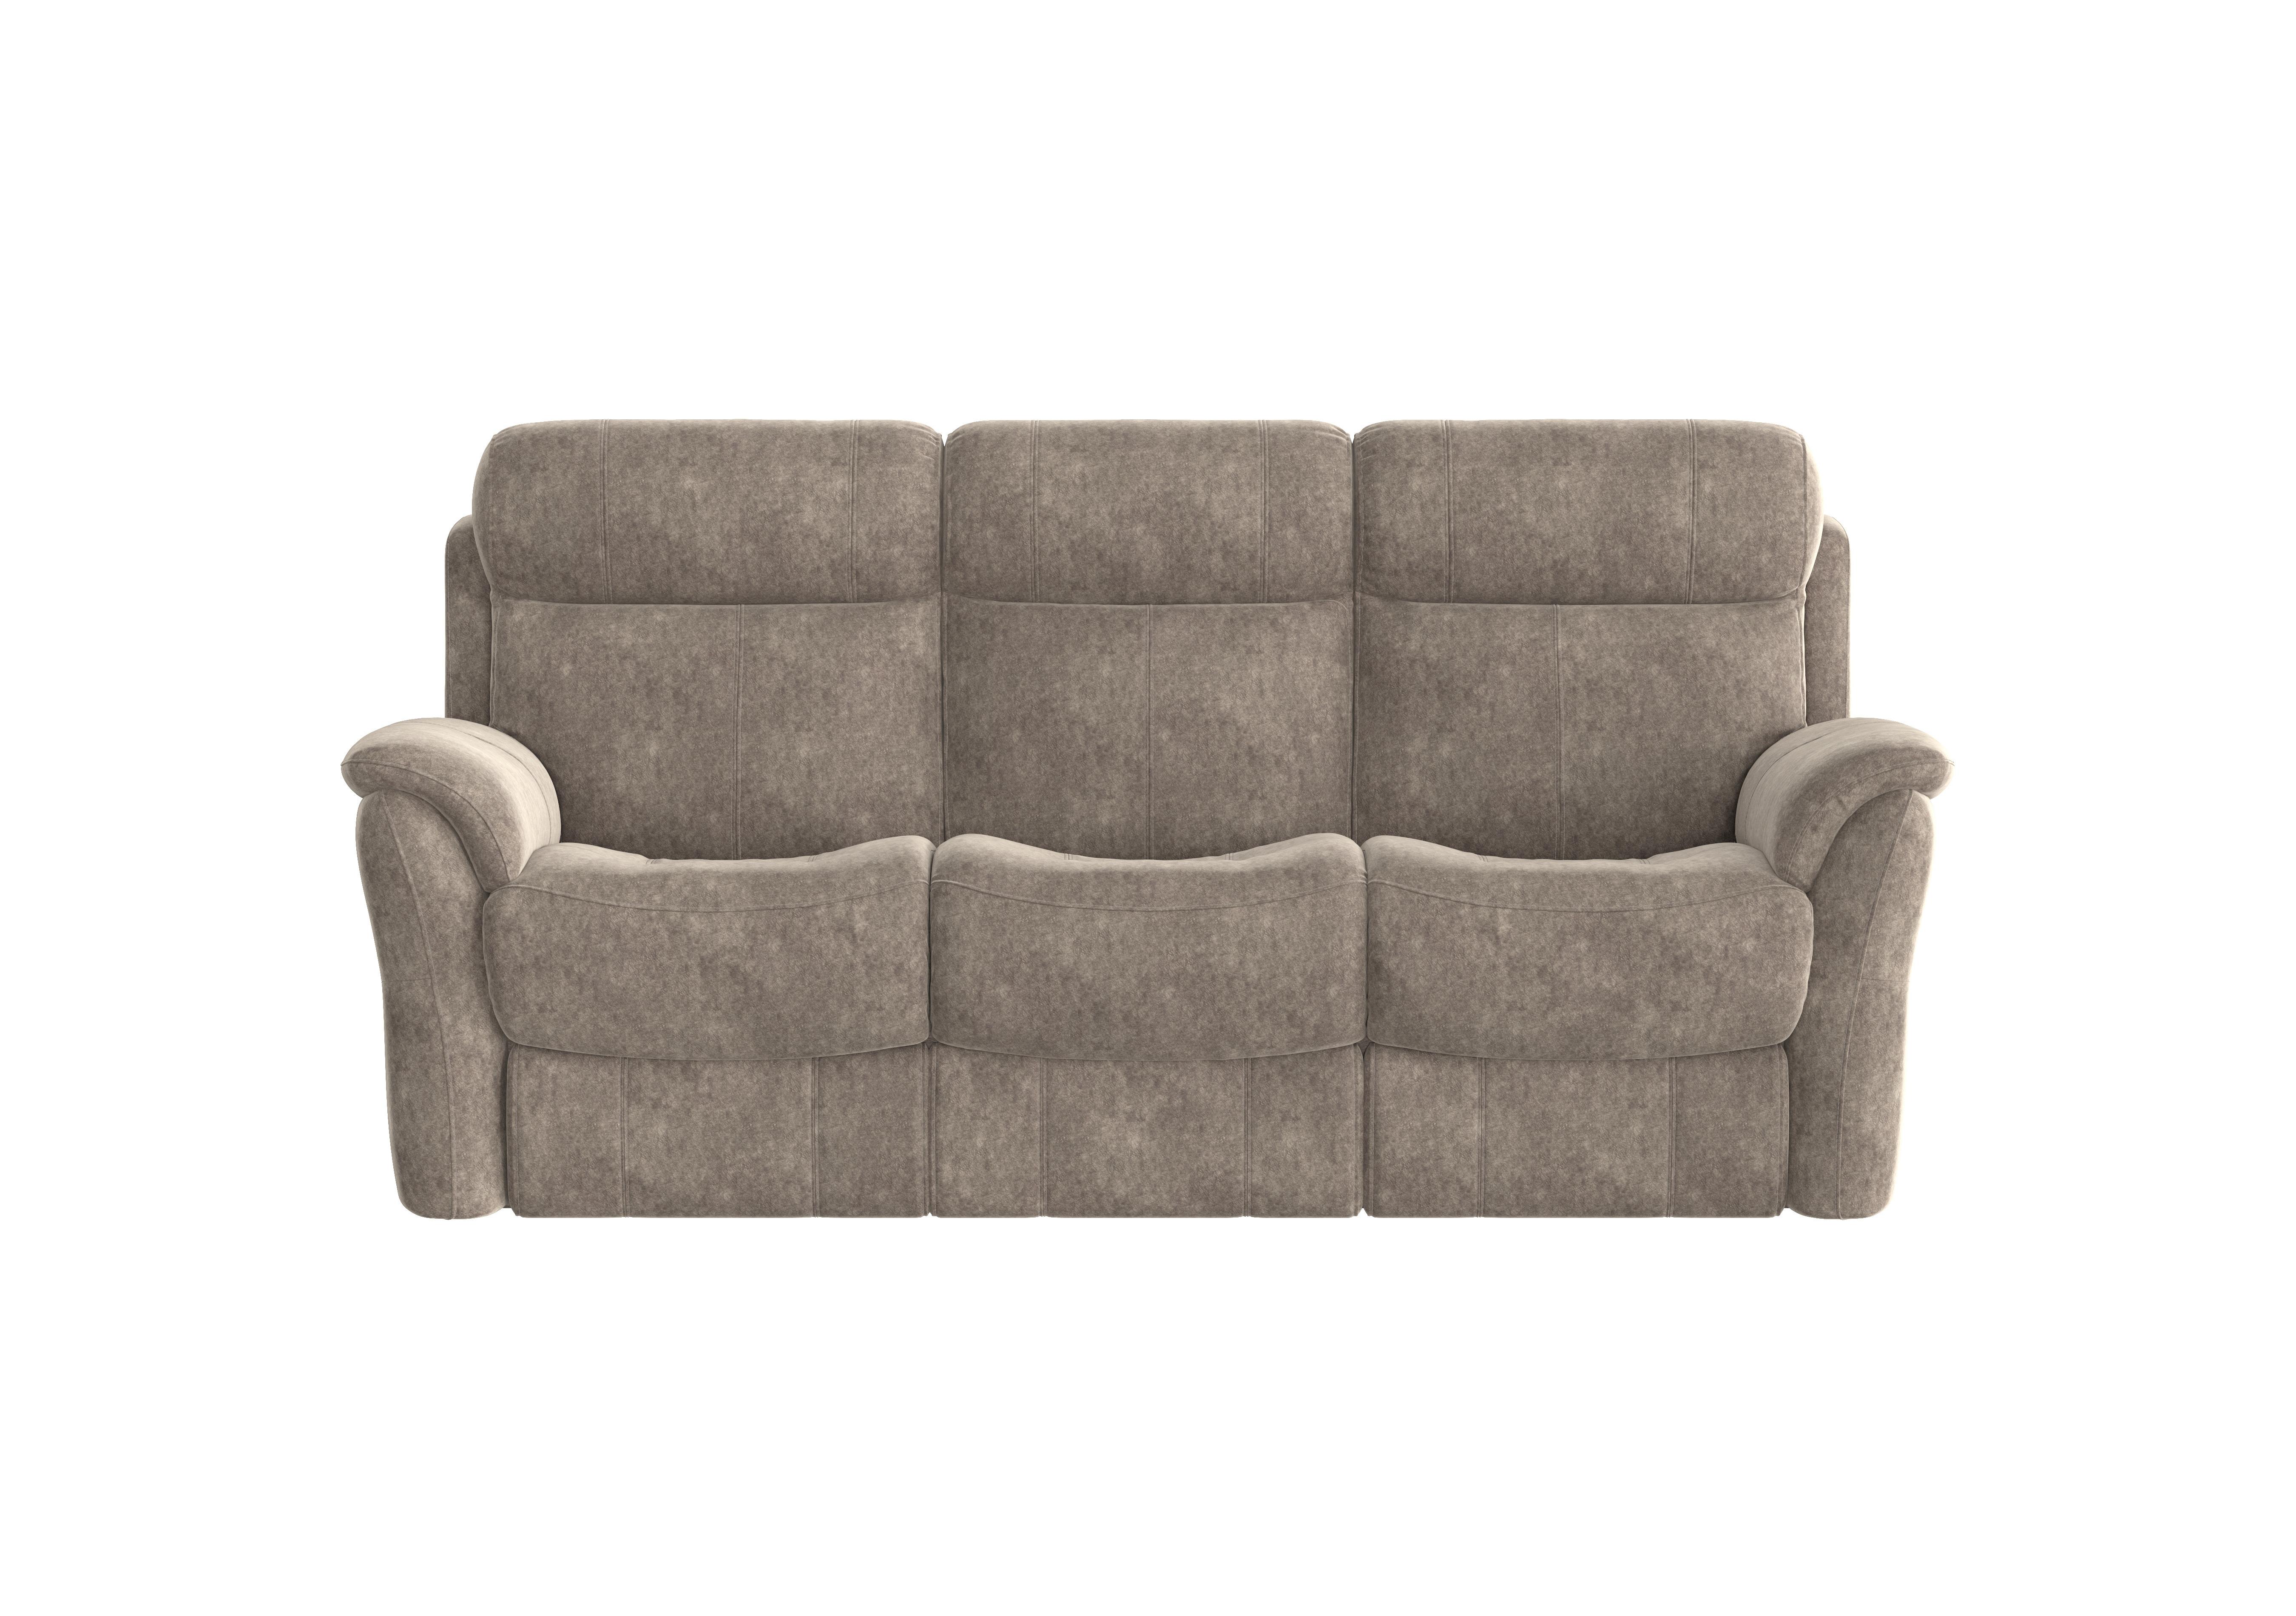 Relax Station Revive 3 Seater Fabric Sofa in Bfa-Bnn-R29 Fv1 Mink on Furniture Village